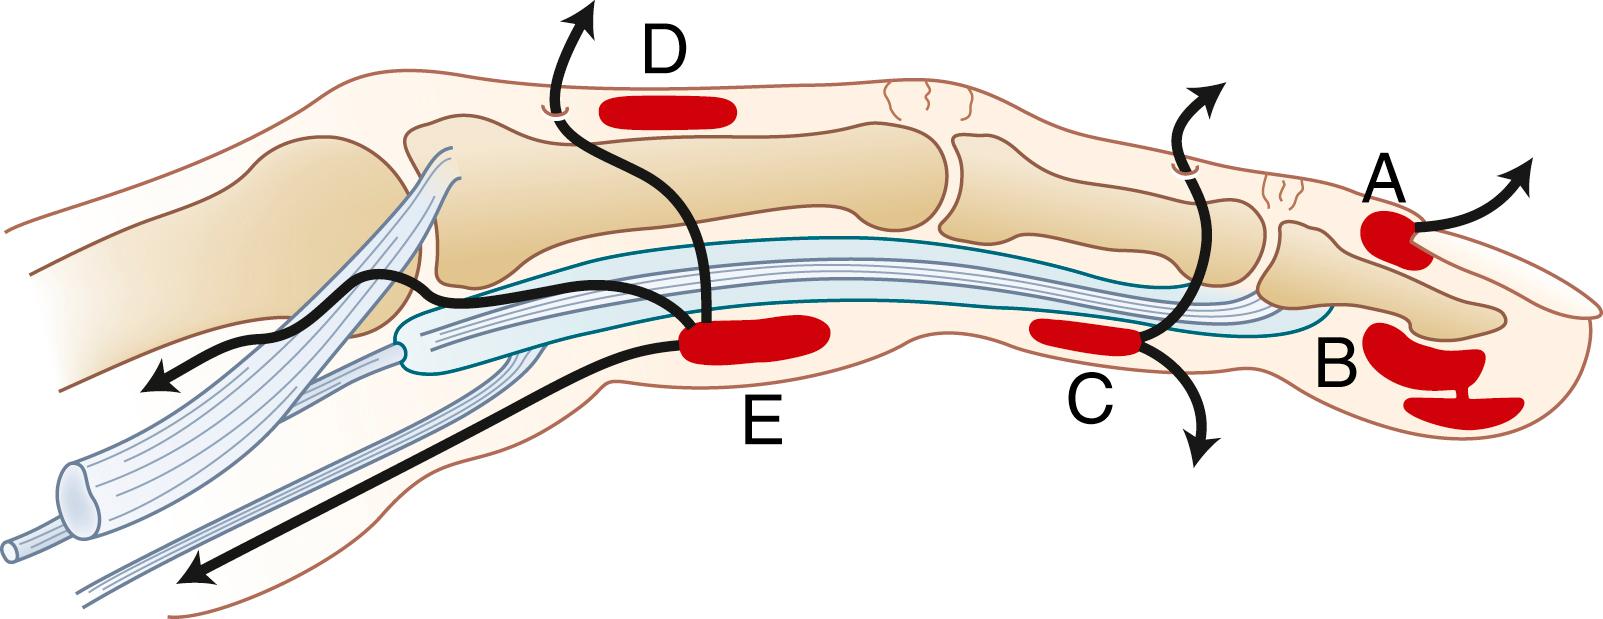 Fig. 70.37, Spread of soft tissue infections in the hand occurs through loss of containment from the original site and erosion into and spread through contiguous anatomic compartments. A, Paronychium. Infecting organisms access periungual tissues through fissures in the eponychial or paronychial tissues and often are discharged spontaneously in these areas. B, Infection of pulp tissues (felon). Fibrous septa within the pulp create collar stud abscesses within the pulp. C, Volar subcutaneous infections in the digit may be discharged percutaneously on either surface of the digit or penetrate dorsally and spread along the sheaths of the flexor or extensor tendons. D, Subcutaneous infections on the dorsum of the digit are usually discharged percutaneously because of the thin and areolar nature of the soft tissues. E, Proximally located digital infections or web space infections may rupture into the palmar spaces by tracking along tendon sheaths, palmar fascia, or lumbrical canal. The continuous sheaths of the thumb and little fingers (radial and ulnar bursae) are continuous with the carpal tunnel and space of Parona at the wrist.